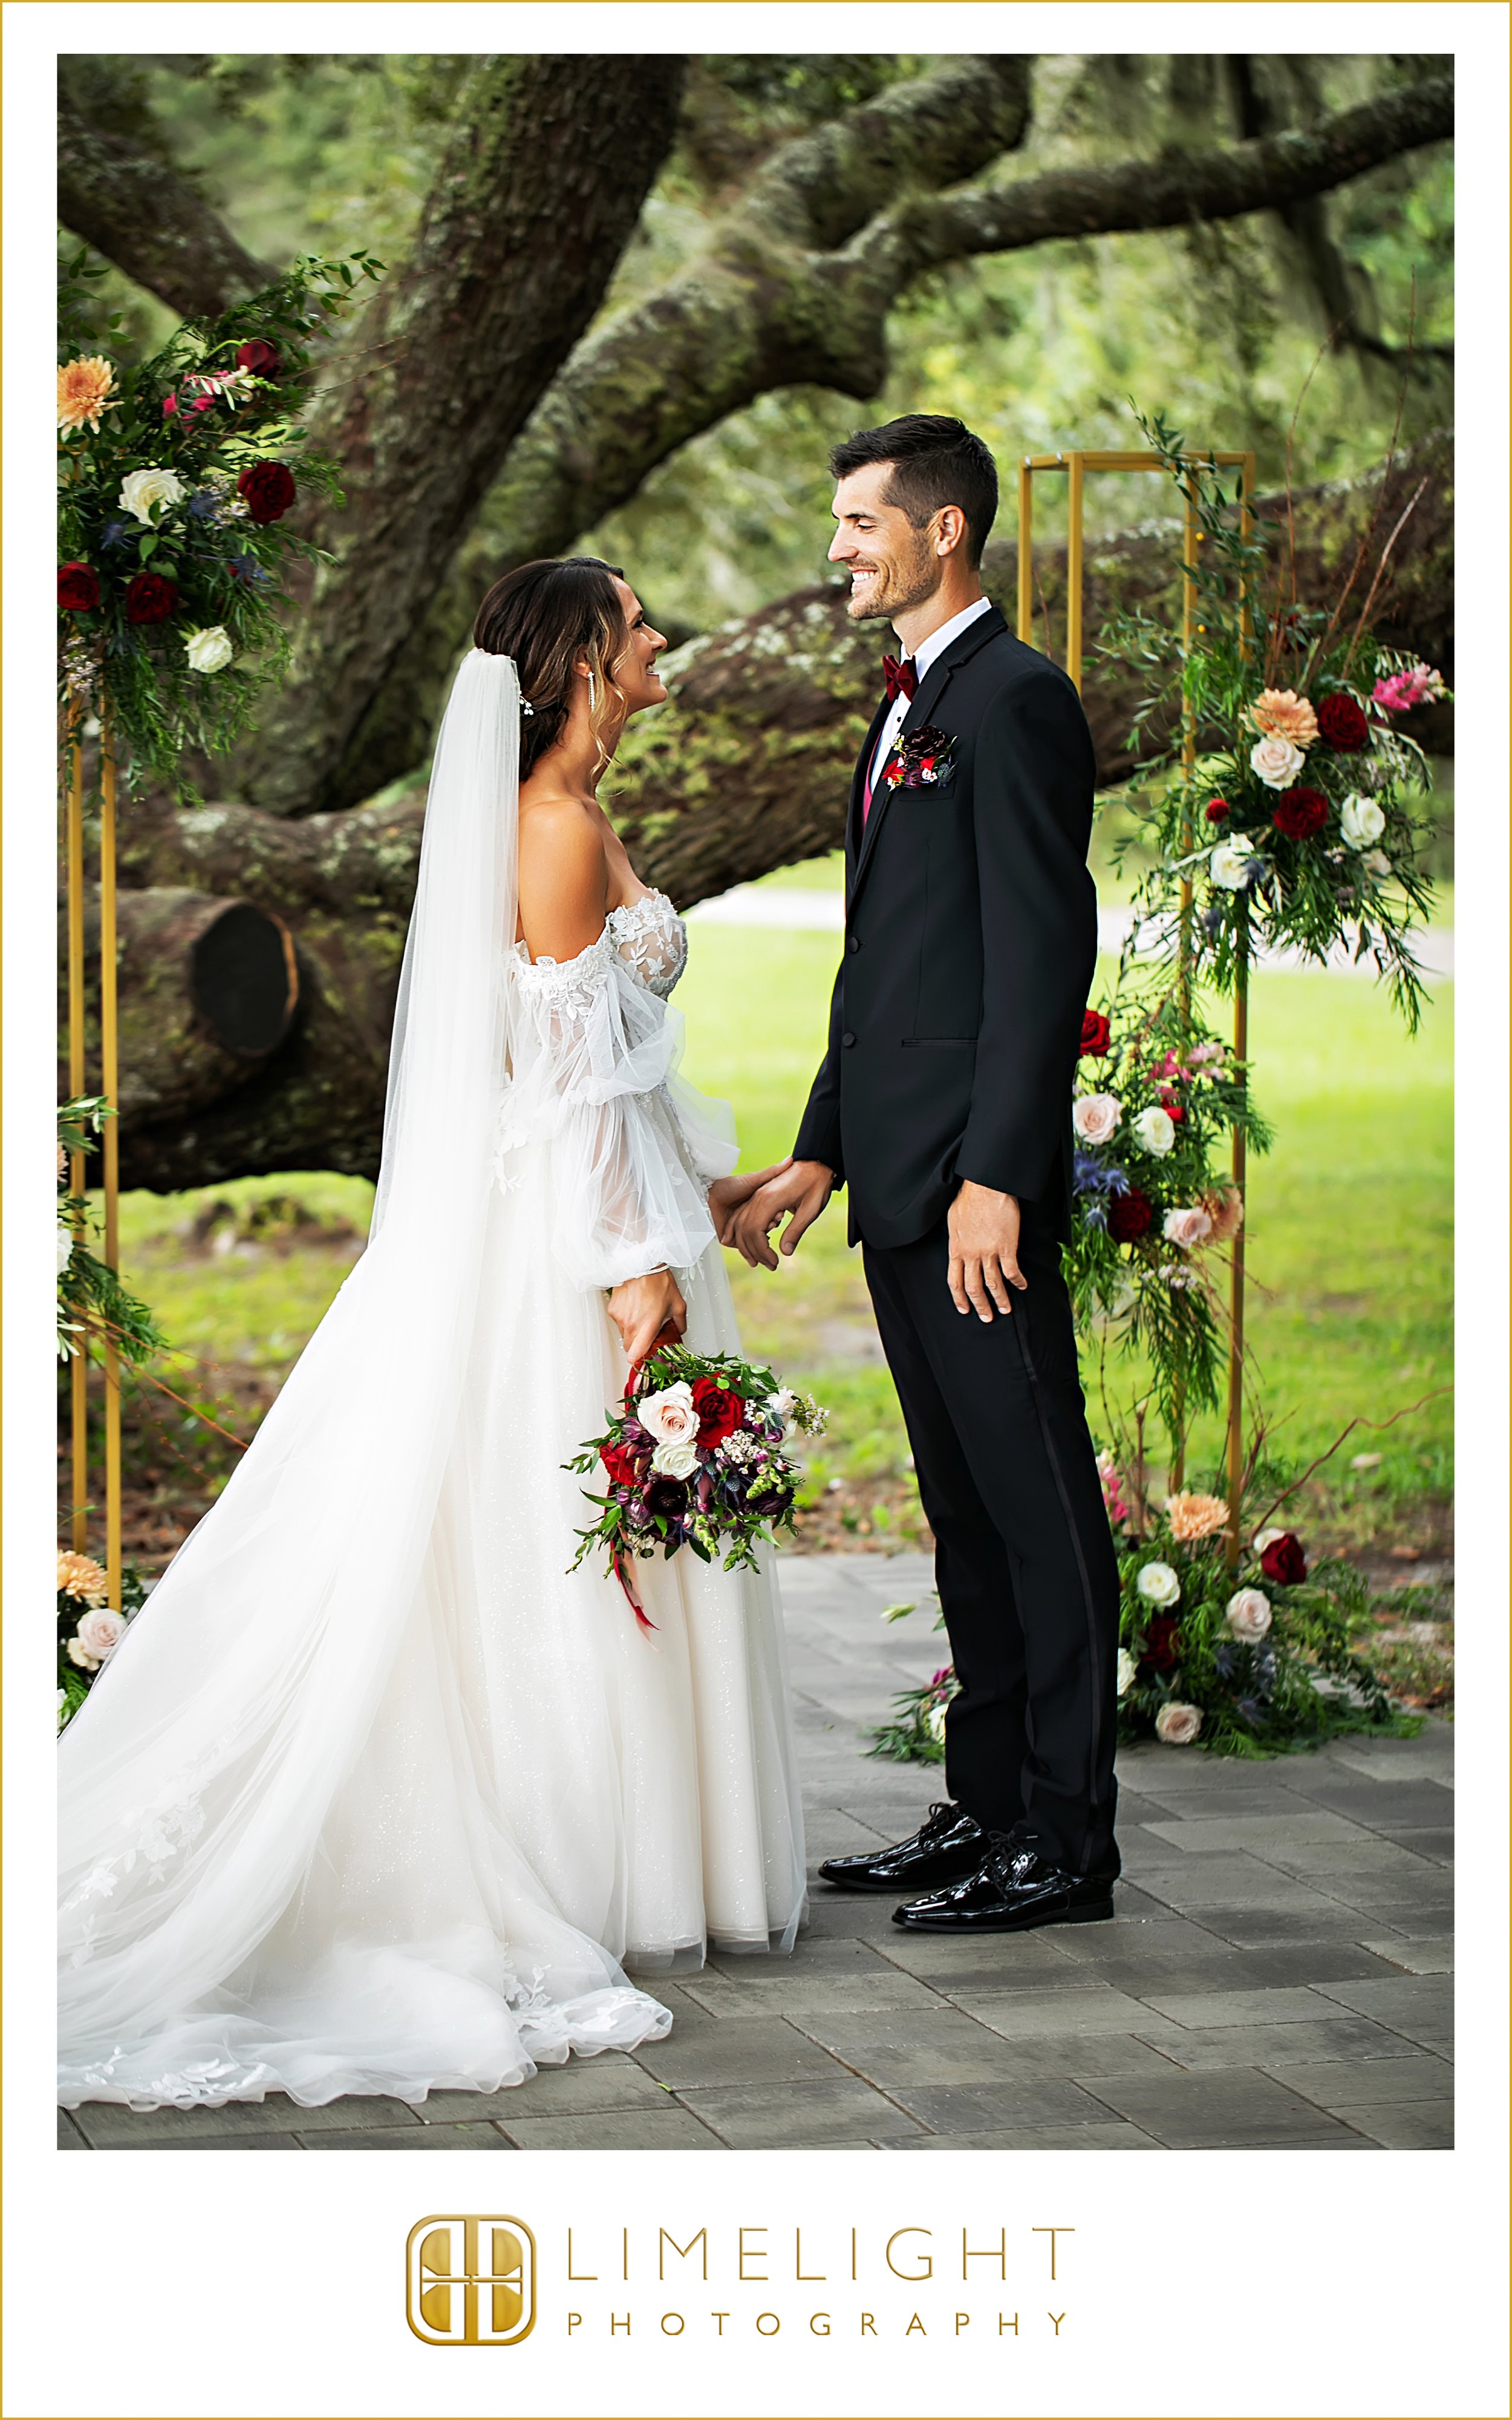 0018-wedding-photography-packages-legacy-lanes-brooksville-fl.jpg